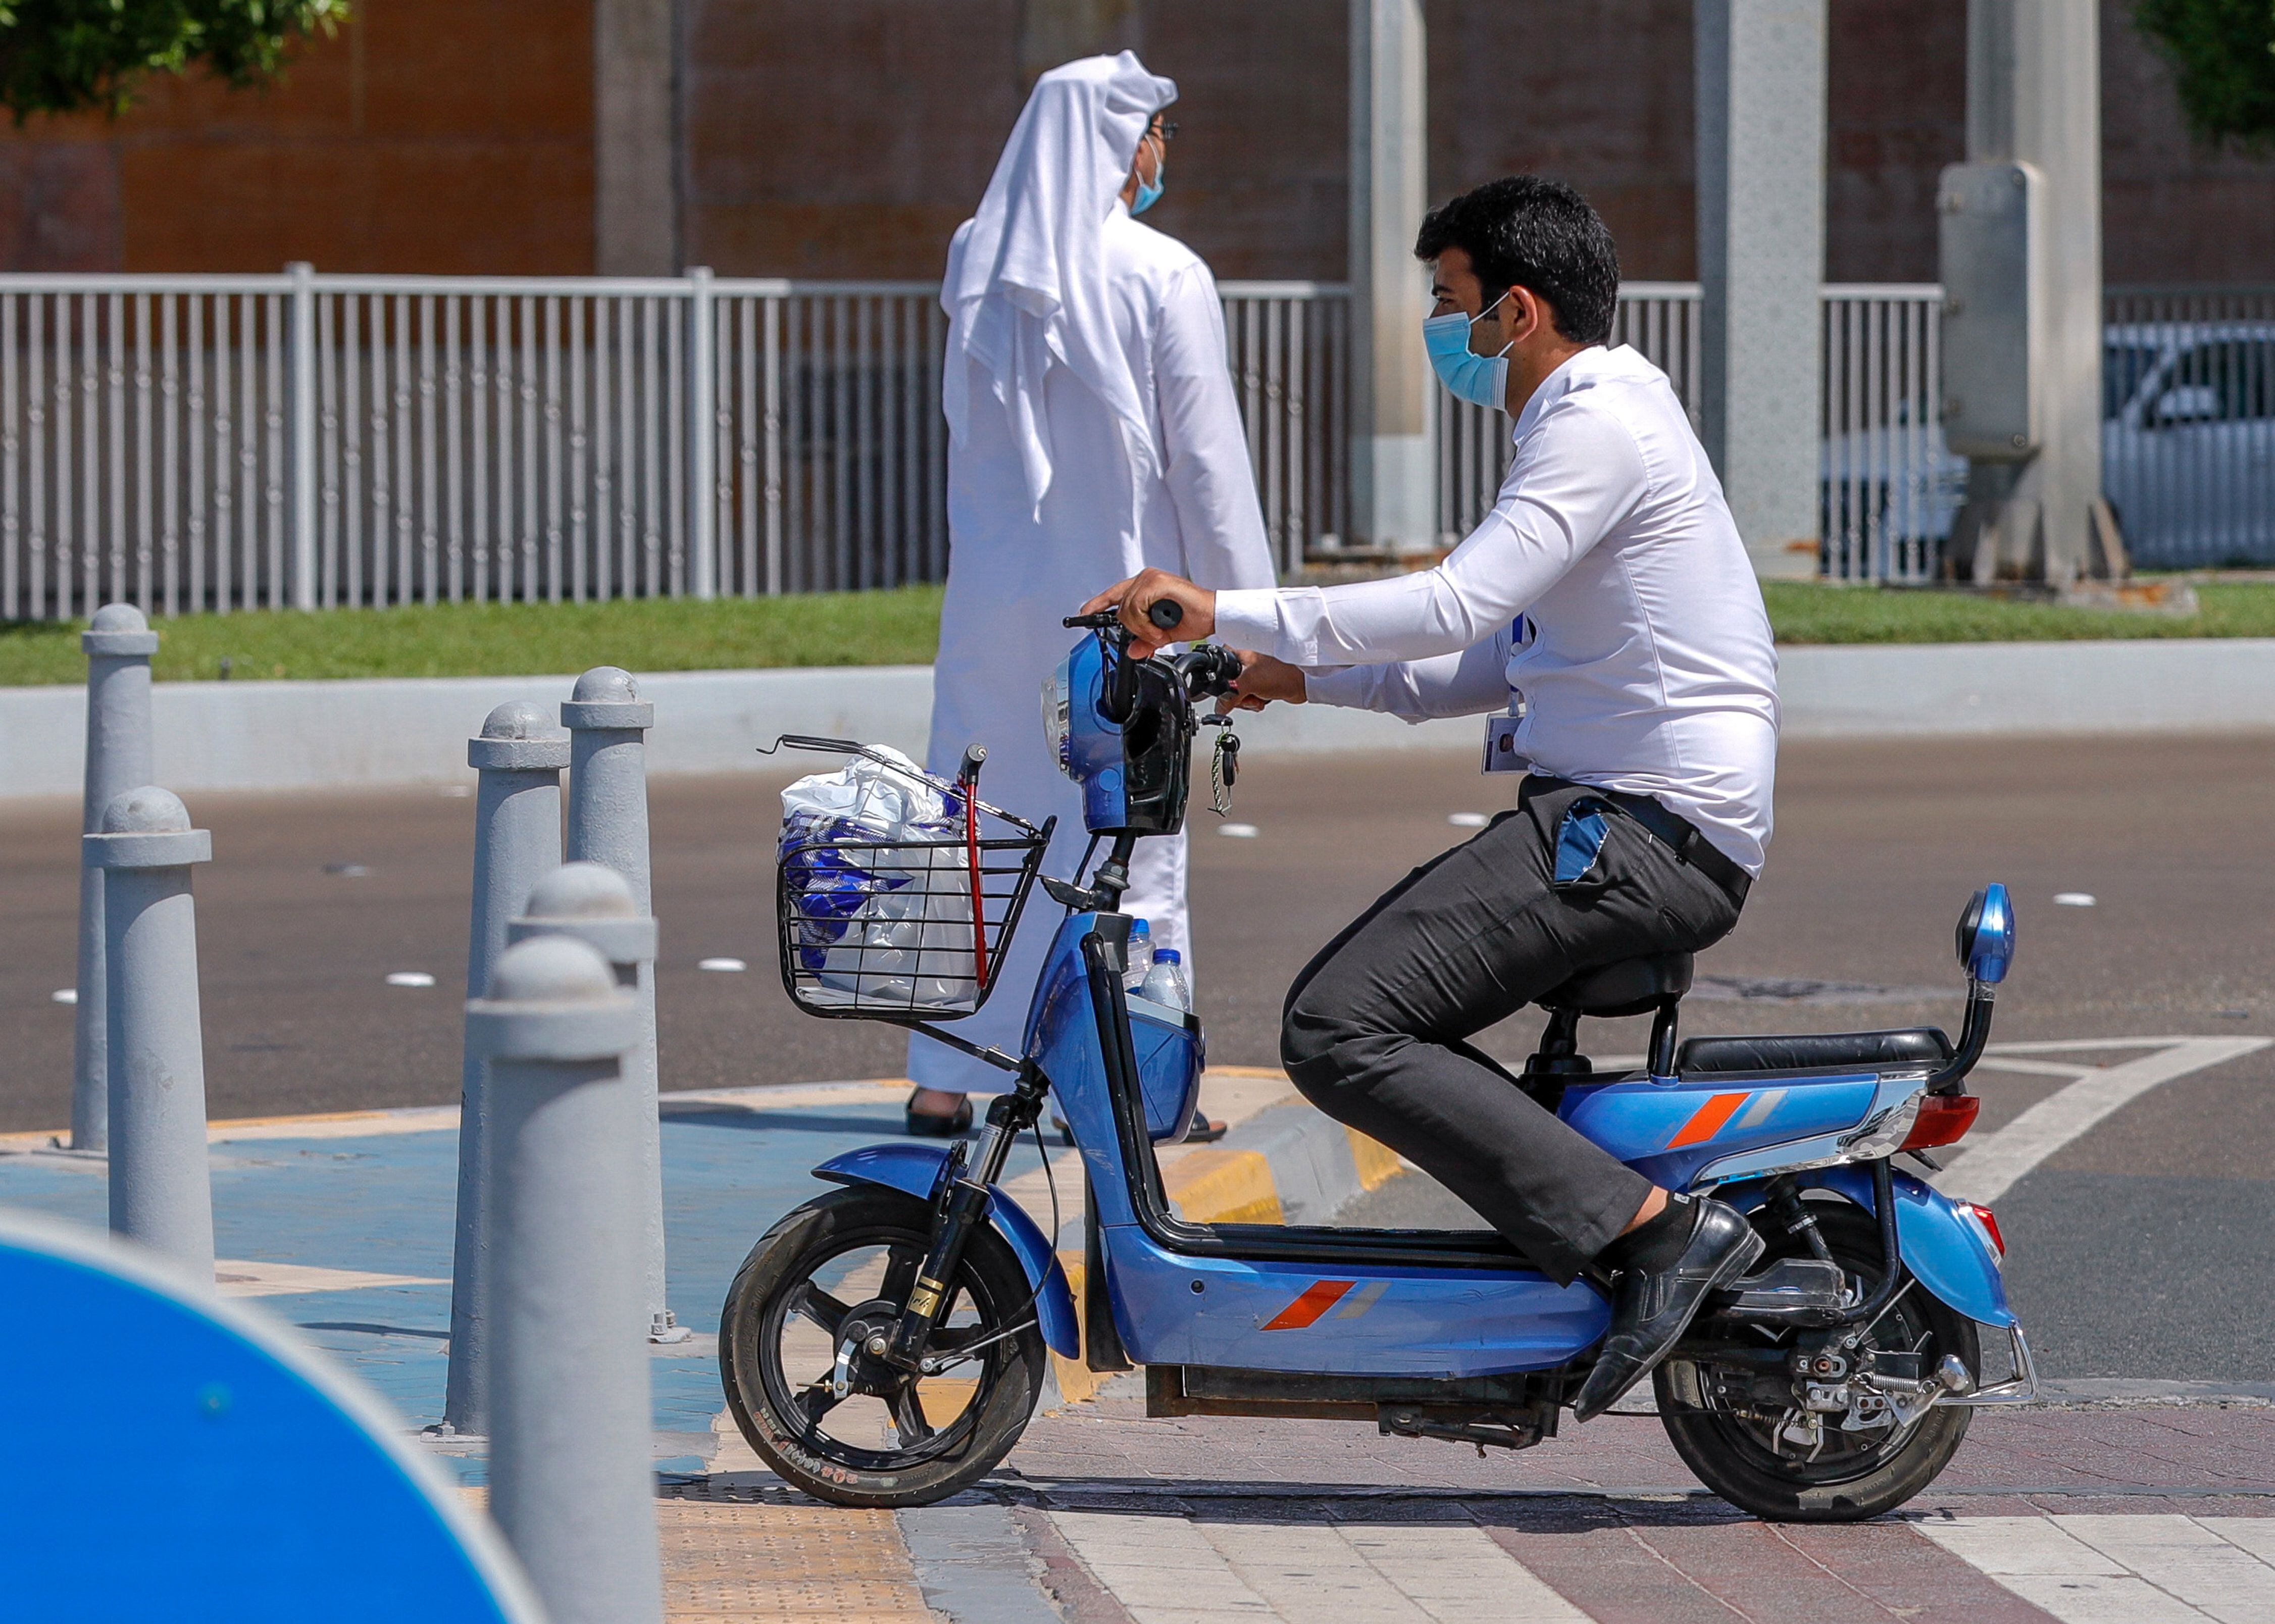 Scooters with seats banned in Abu Dhabi over safety fears